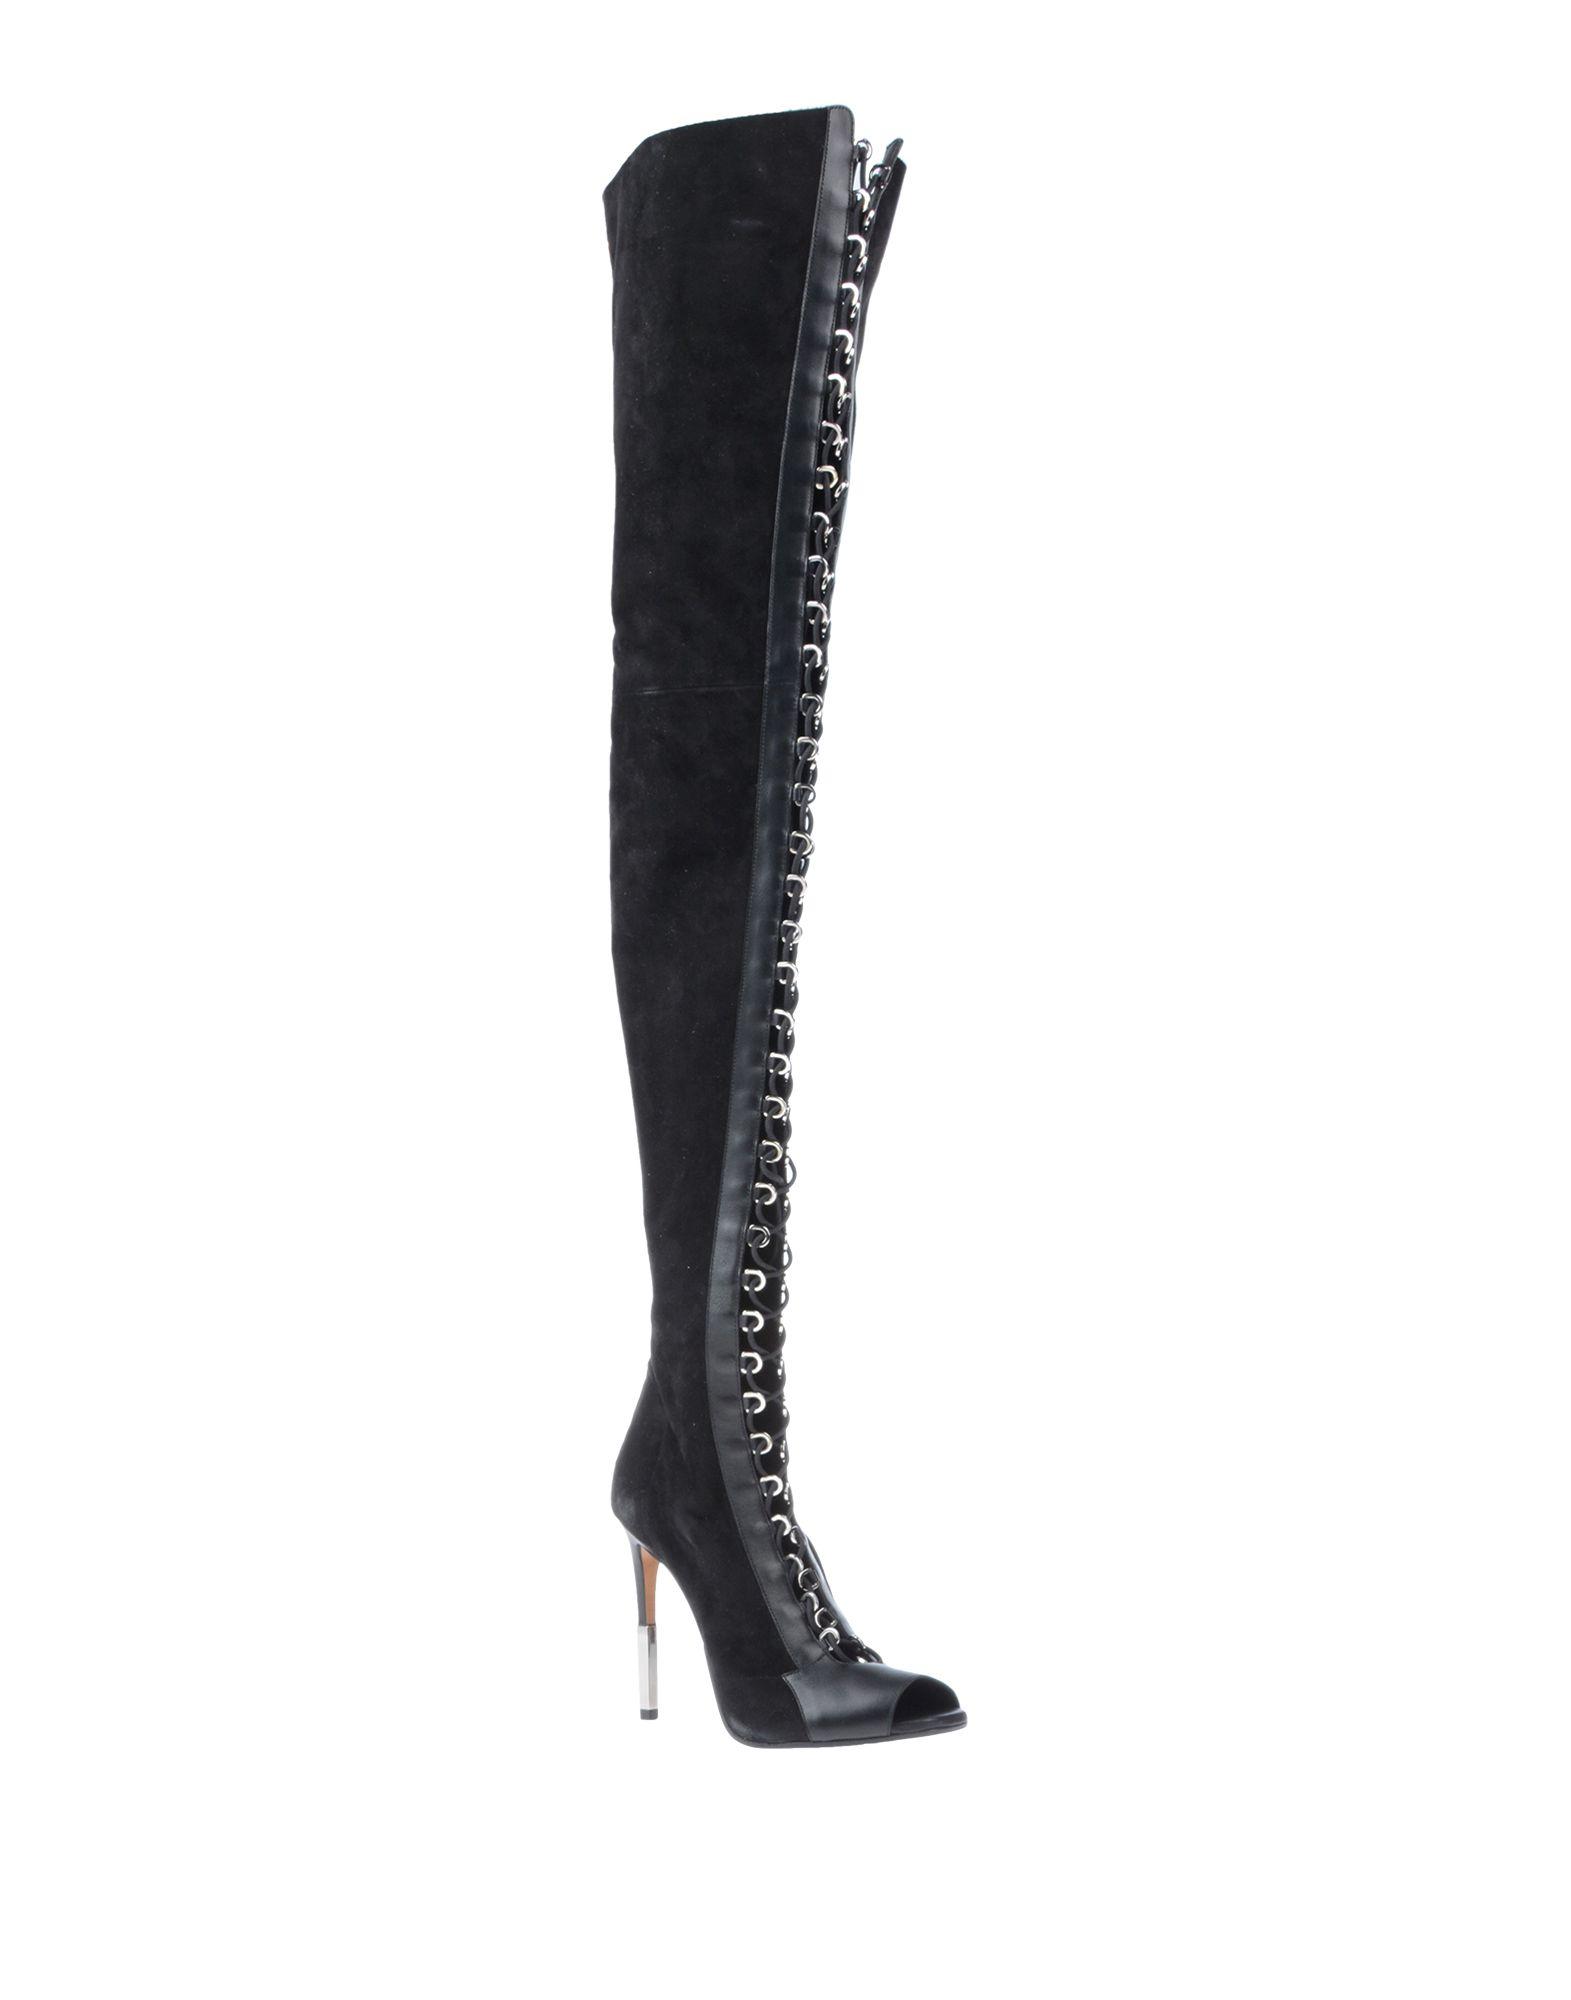 Balmain Suede Boots in Black - Lyst